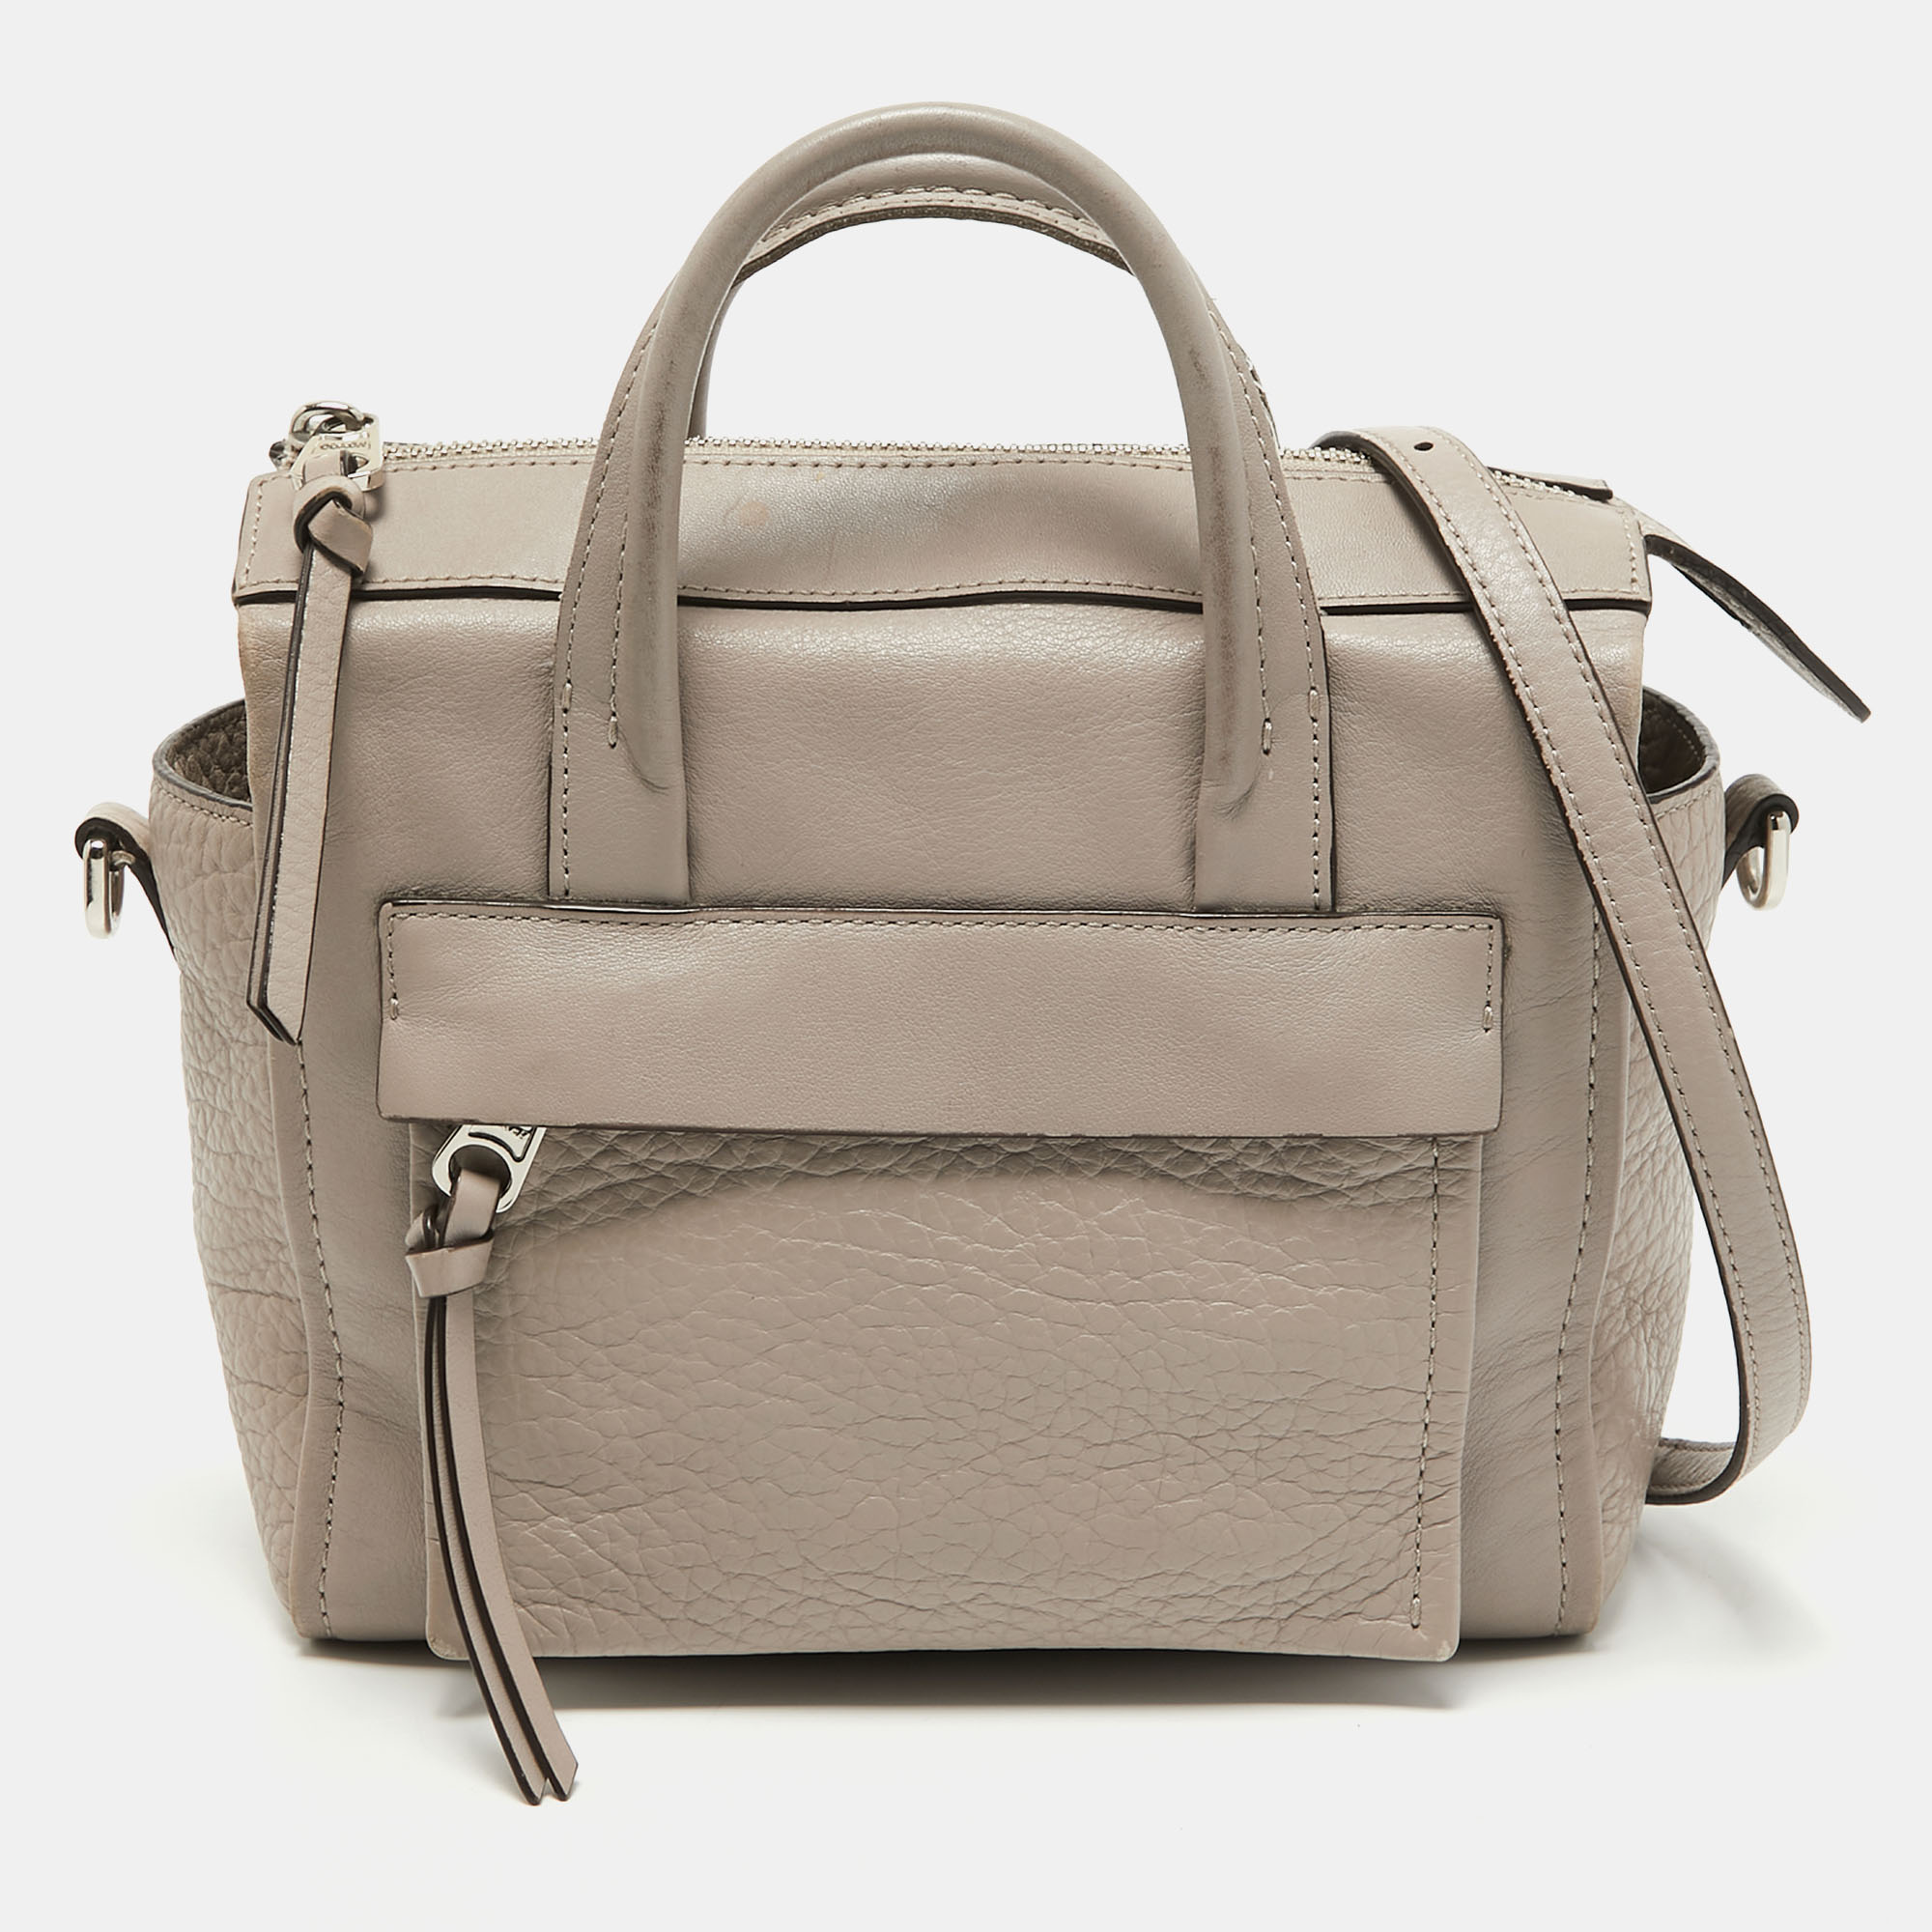 Pre-owned Coach Grey Leather Bleecker Riley Satchel